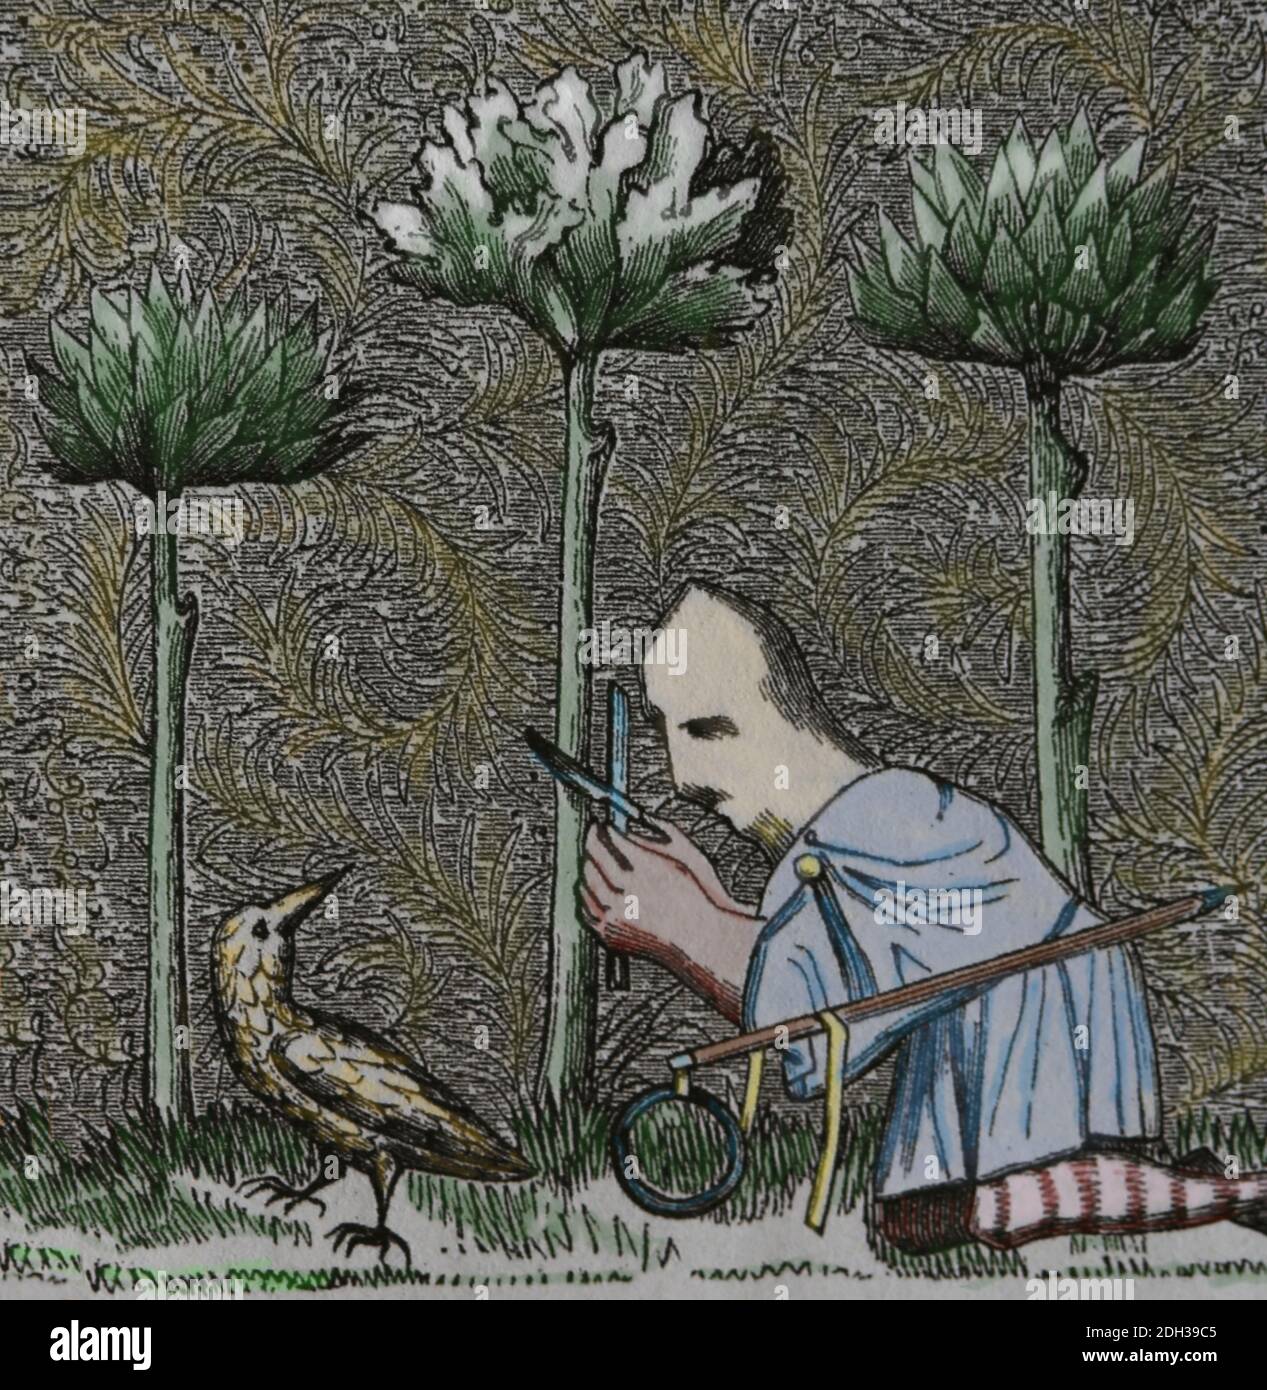 Engraving depicting a bird catcher at work catching woodcock using a disguise and a noose. 14th century. Later colouration. Stock Photo